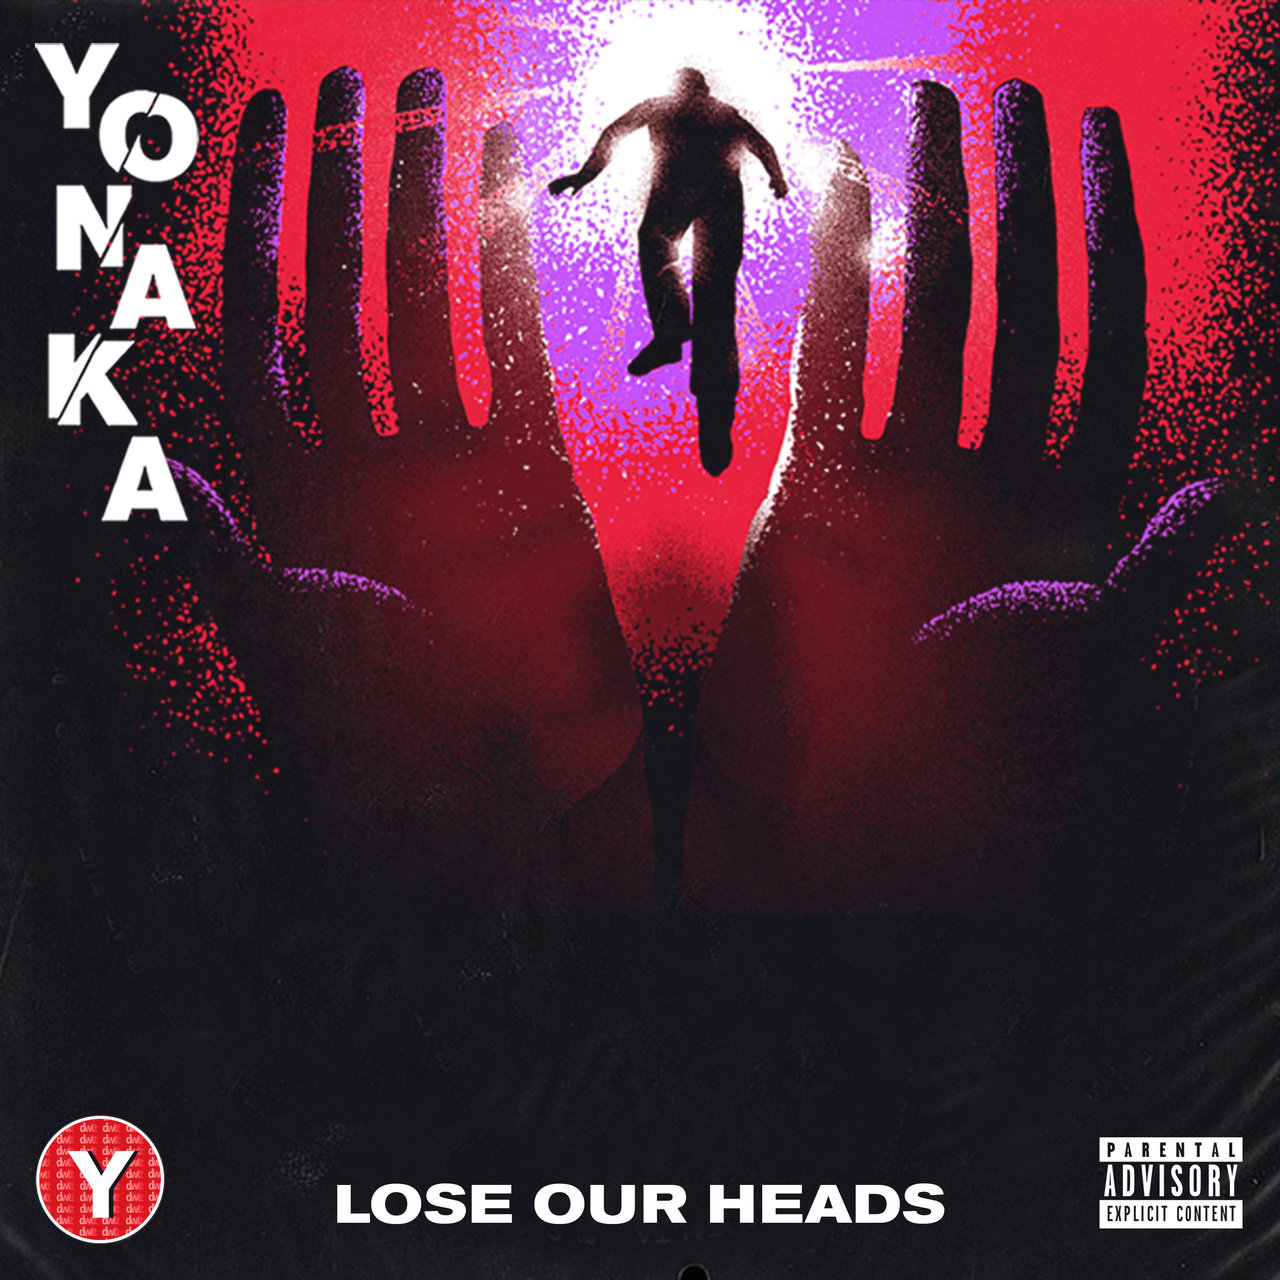 YONAKA Lose Our Heads cover artwork